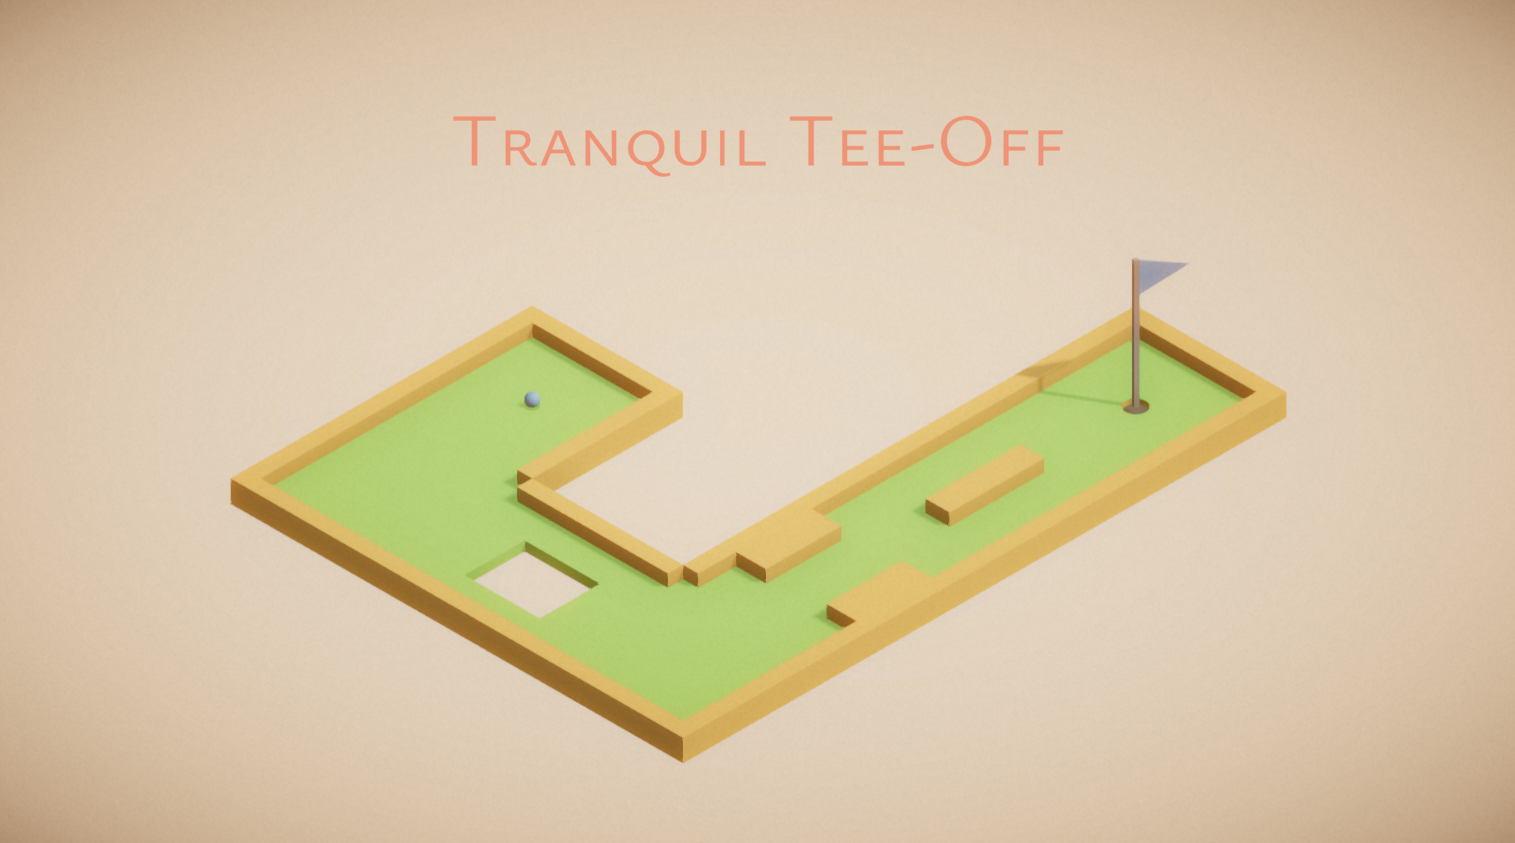 Tranquil Tee-Off